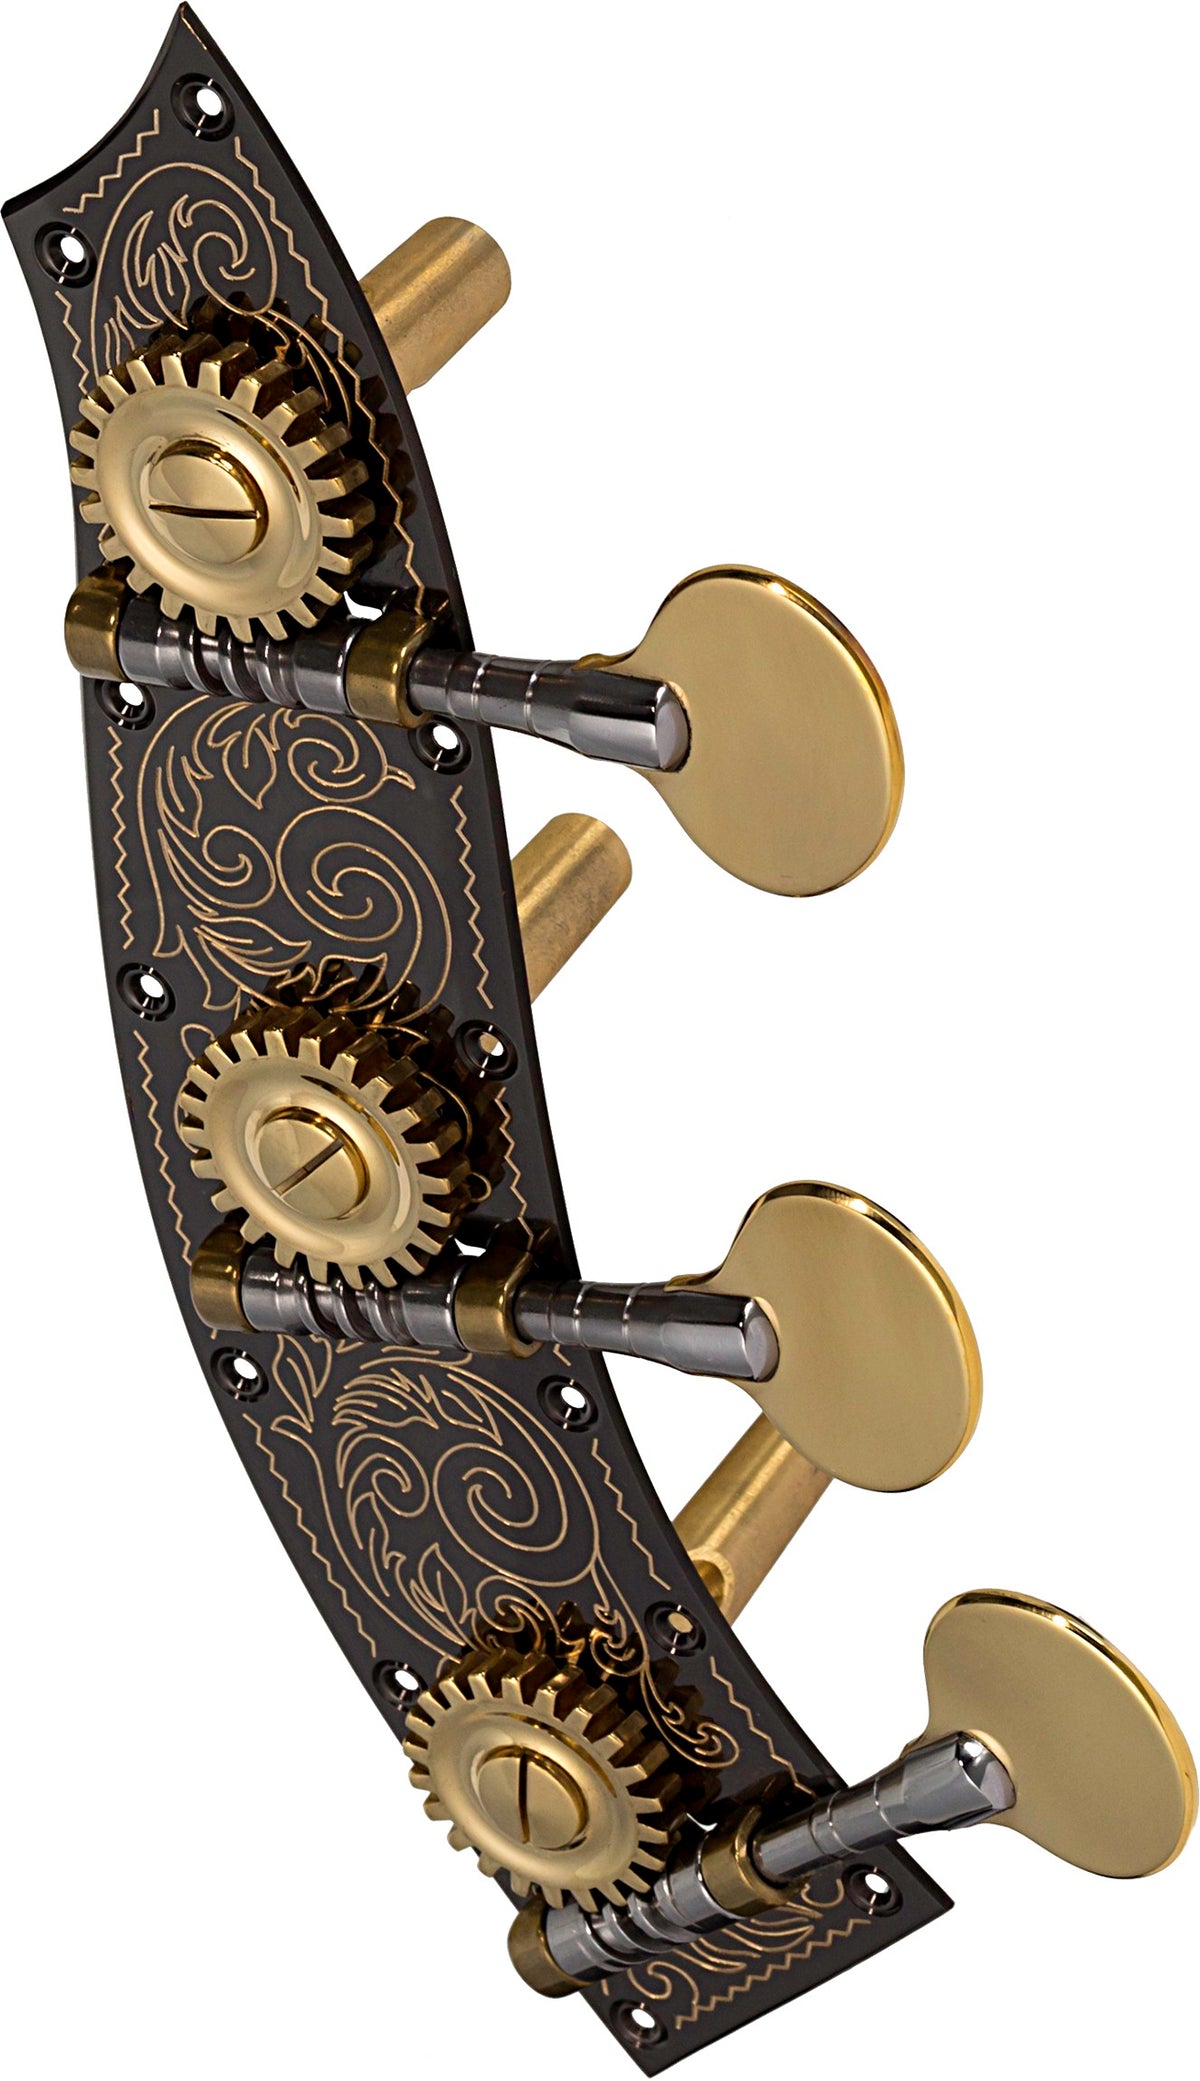 Bass Tuning Machines With Tyrolean Design - 4 String Model